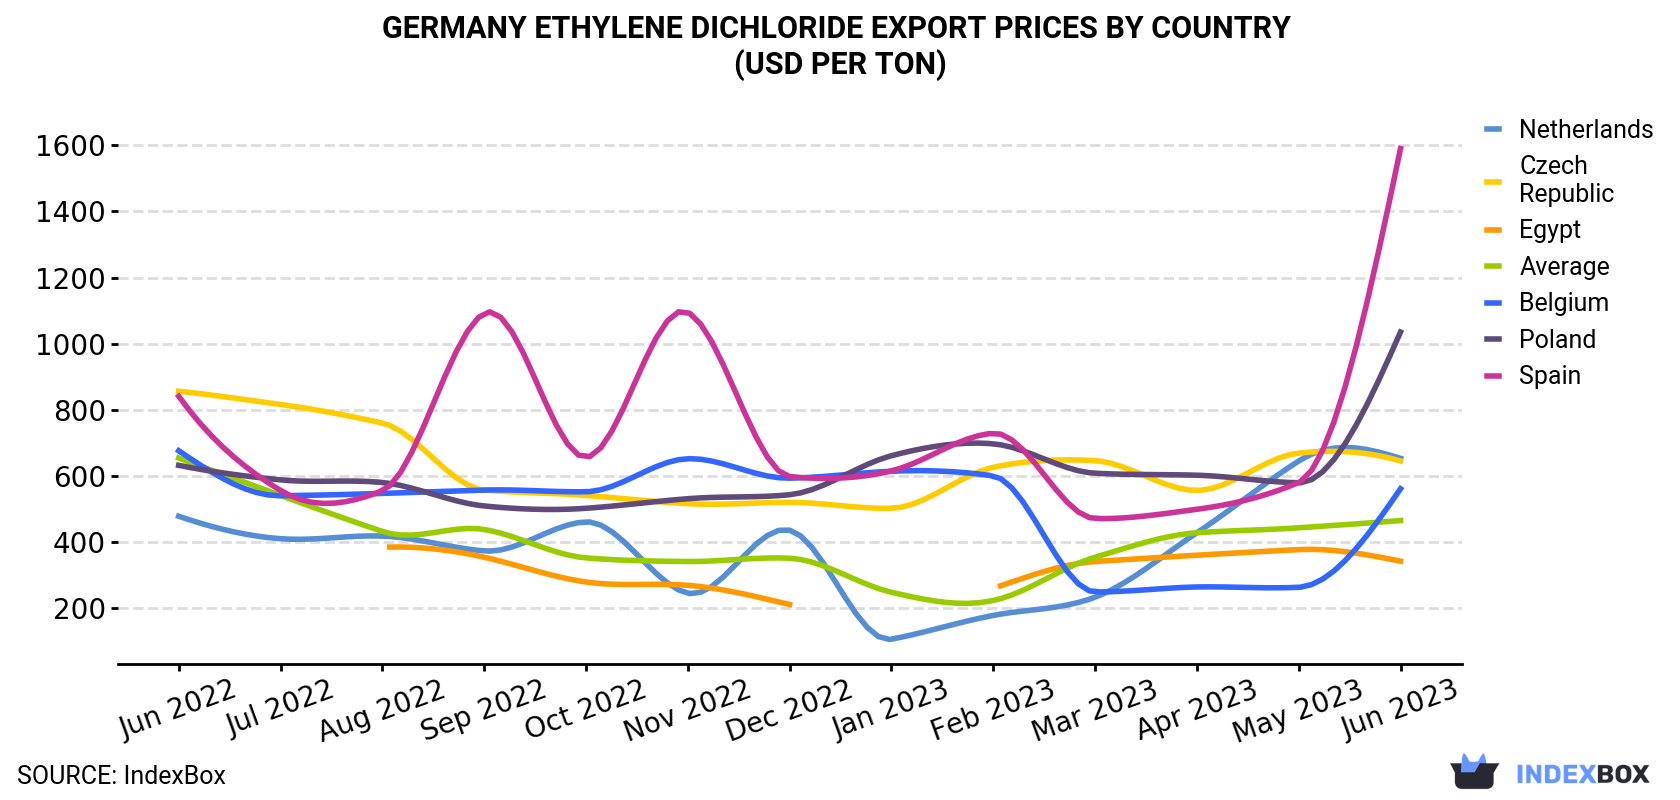 Germany Ethylene Dichloride Export Prices By Country (USD Per Ton)